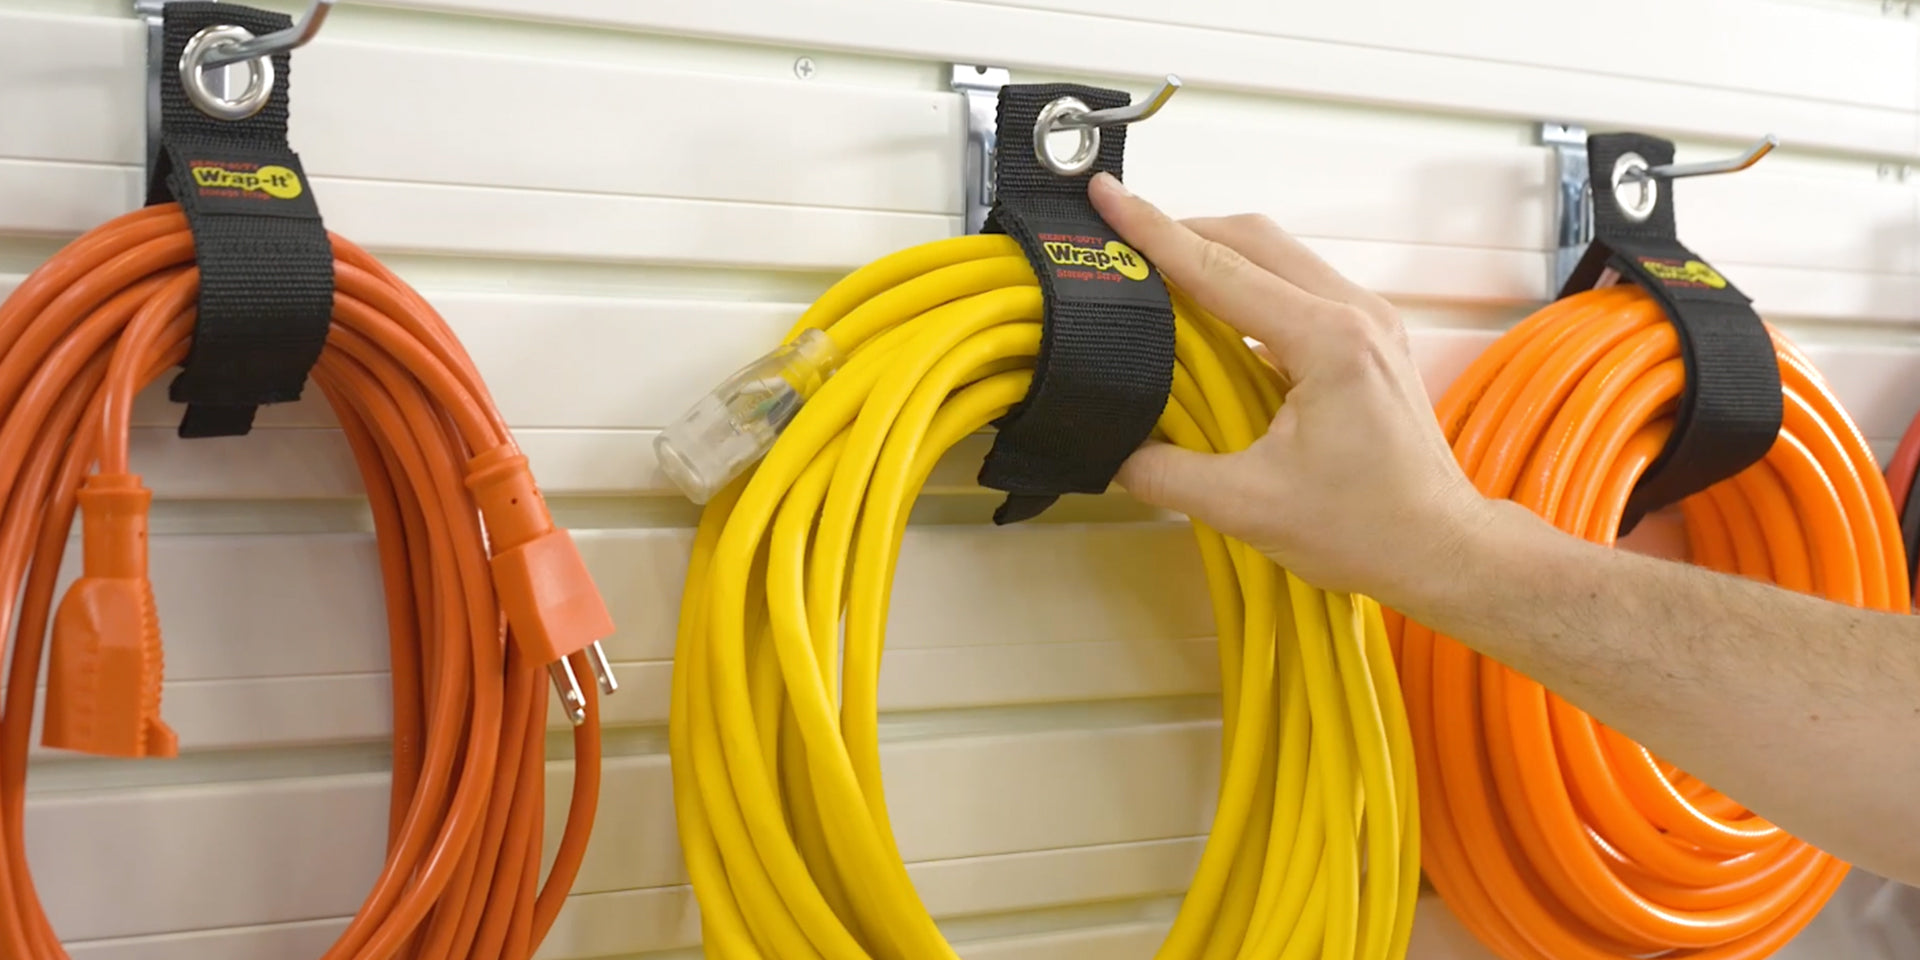 Load video: video of heavy-duty wrap-it storage strap as an extension cord organizer hanging in garage, showing how to the product works for garage organization and home storage